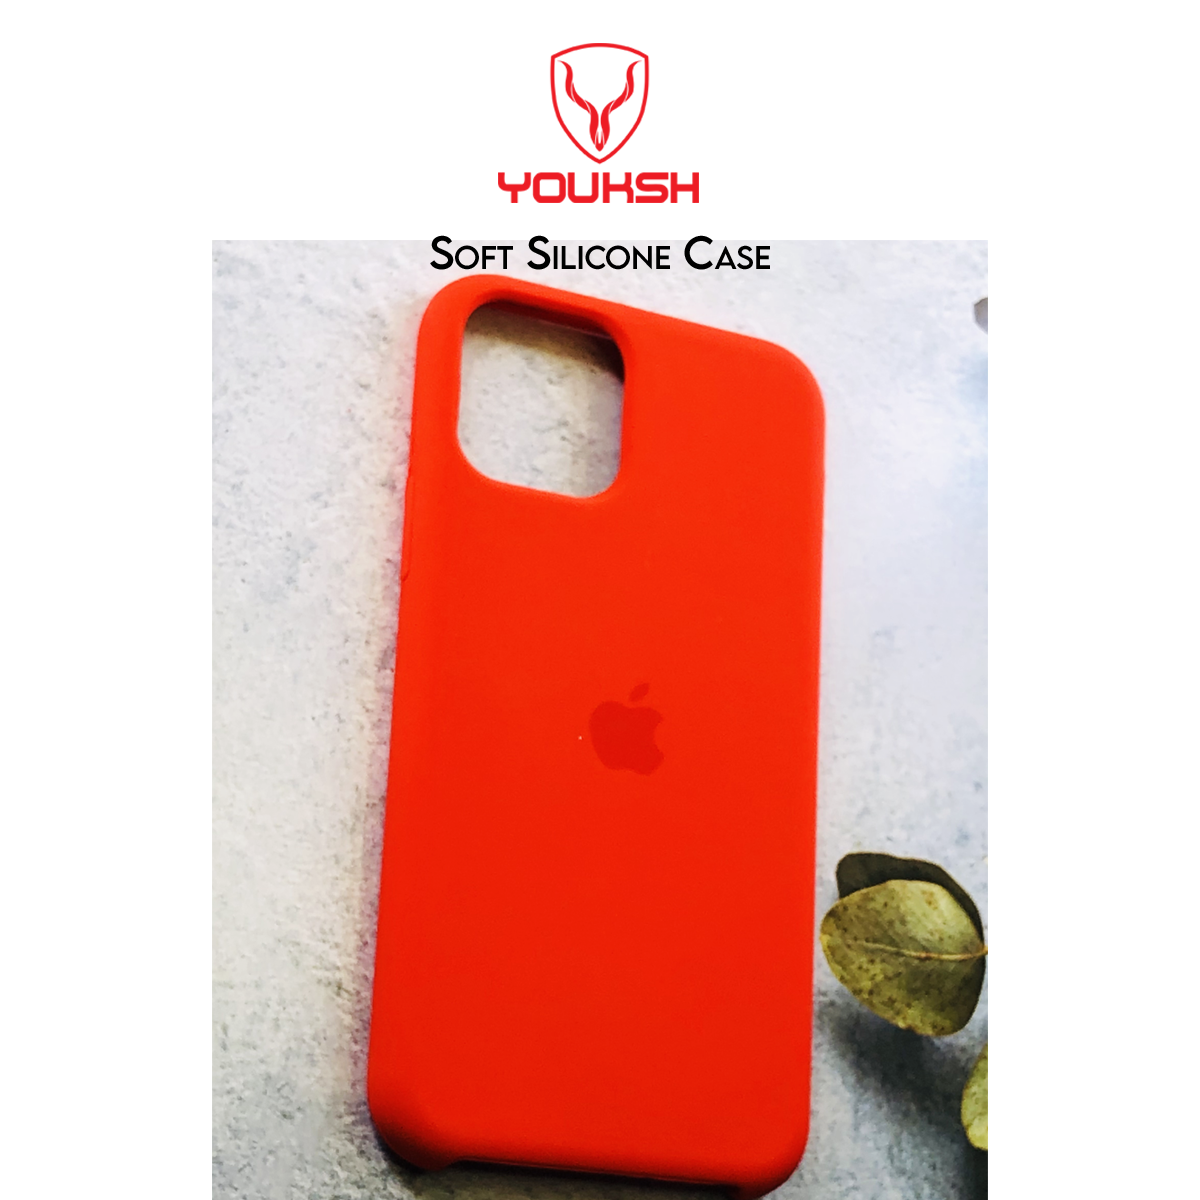 Apple iPhone 11 Pro - Youksh Premium Ultra Slim Shockproof Liquid Silky Silicone Soft Rubber Comfortable Protective Case.